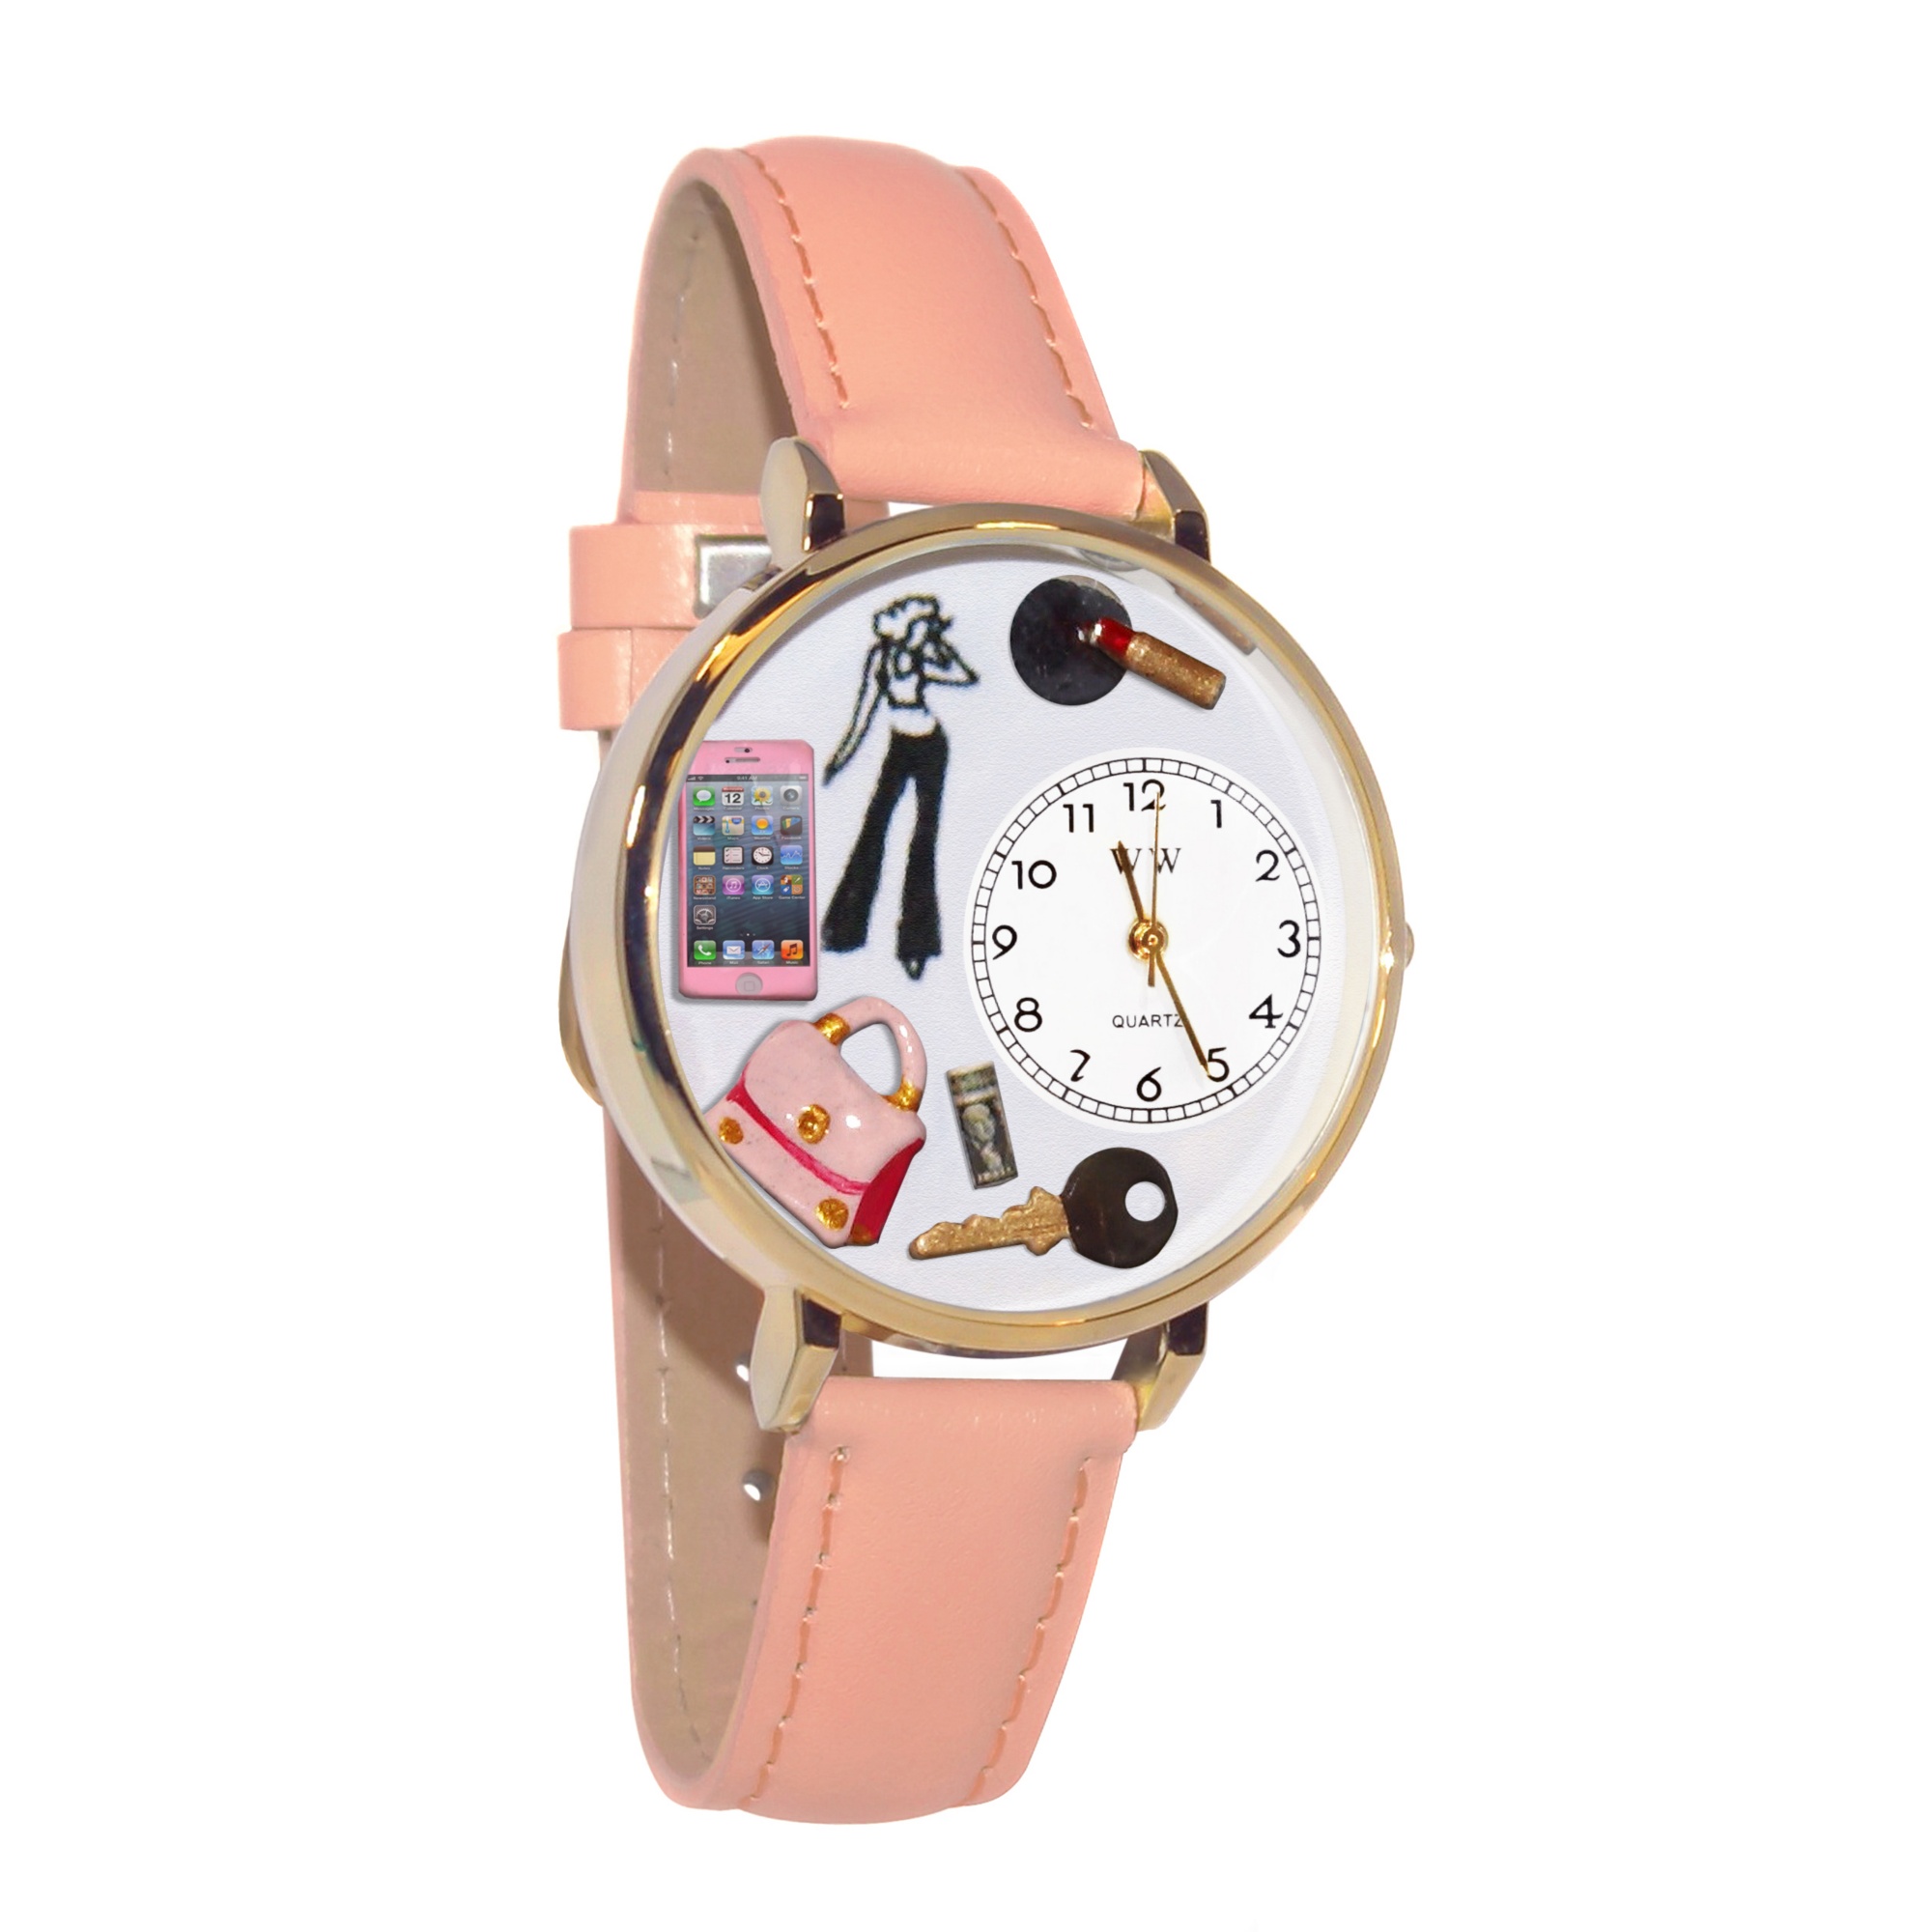 Personalized Teen Girl Watch in gold or silver case at  